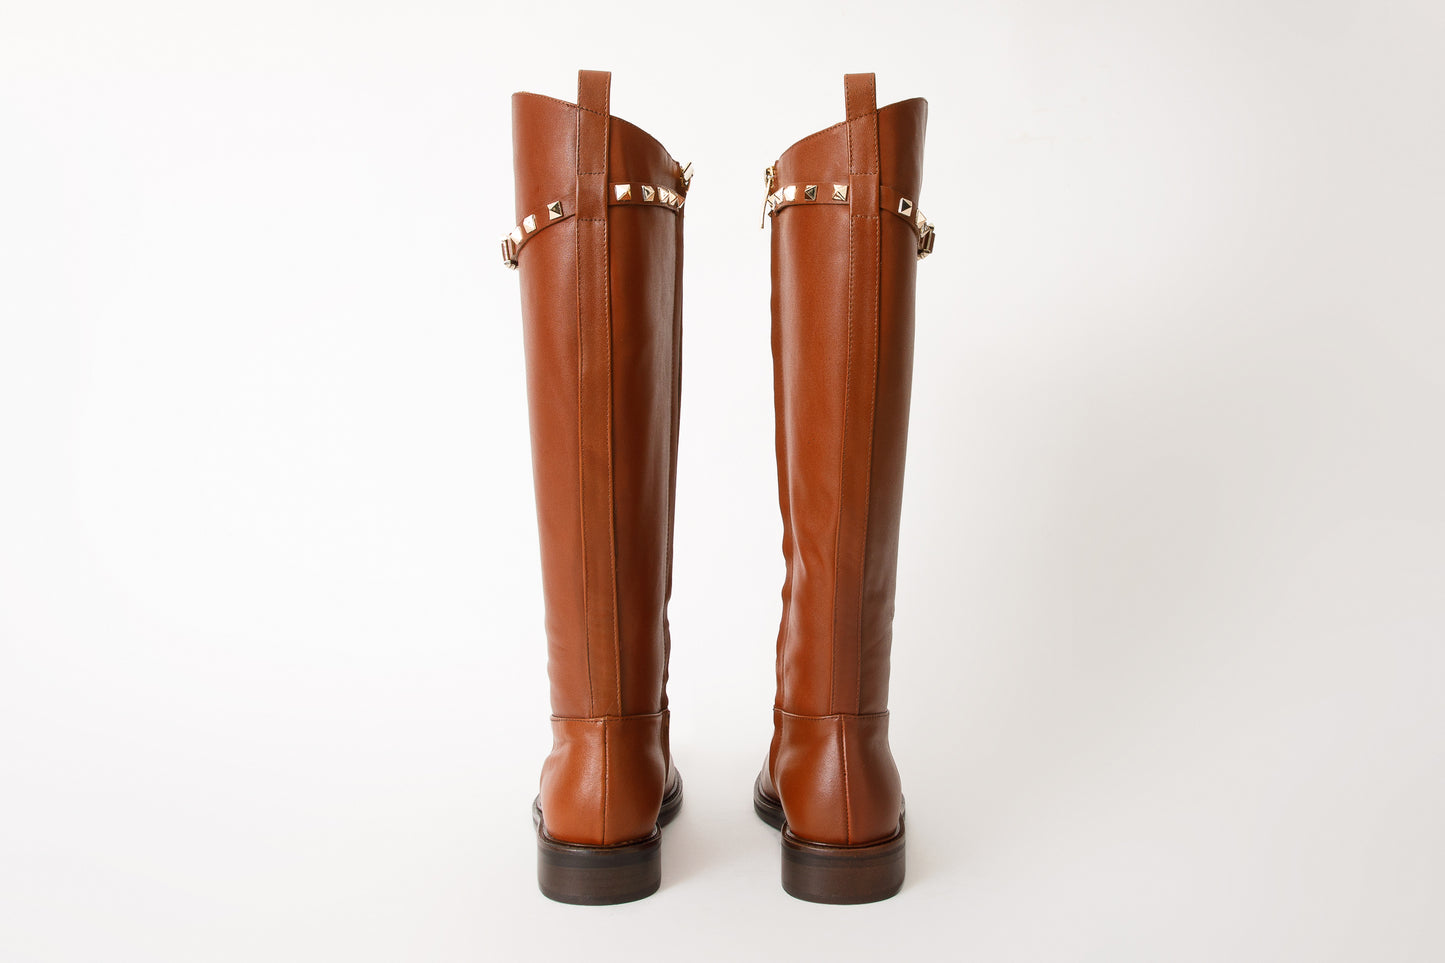 The Rica Tan Leather Knee High Women Boot